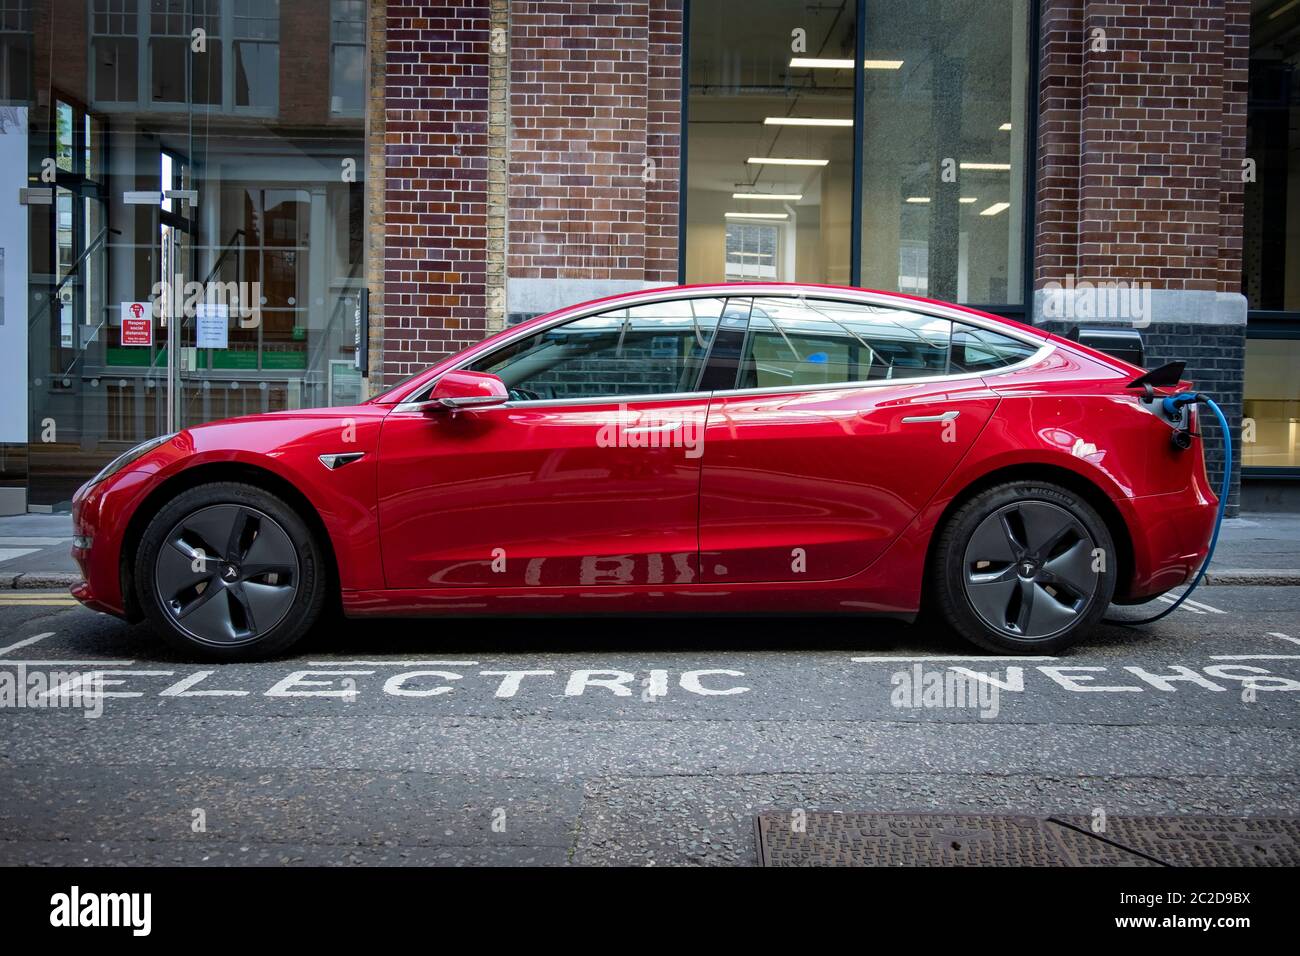 LONDON, JUNE, 2020: A red Tesla Model 3 parked and charging on city street Stock Photo